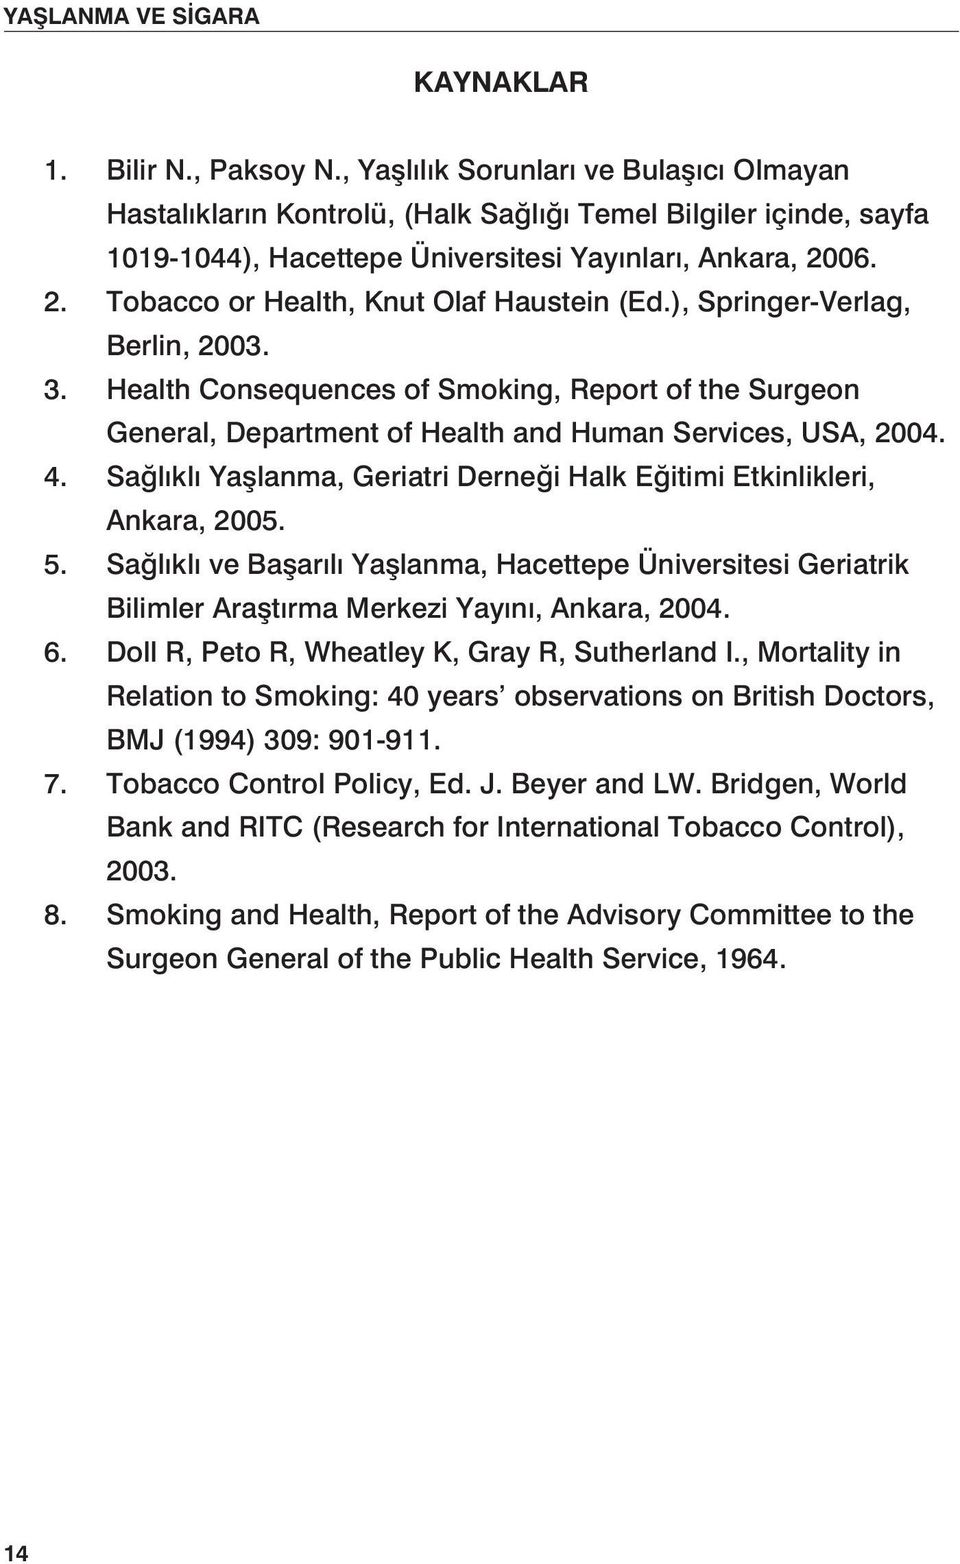 06. 2. Tobacco or Health, Knut Olaf Haustein (Ed.), Springer-Verlag, Berlin, 2003. 3. Health Consequences of Smoking, Report of the Surgeon General, Department of Health and Human Services, USA, 2004.